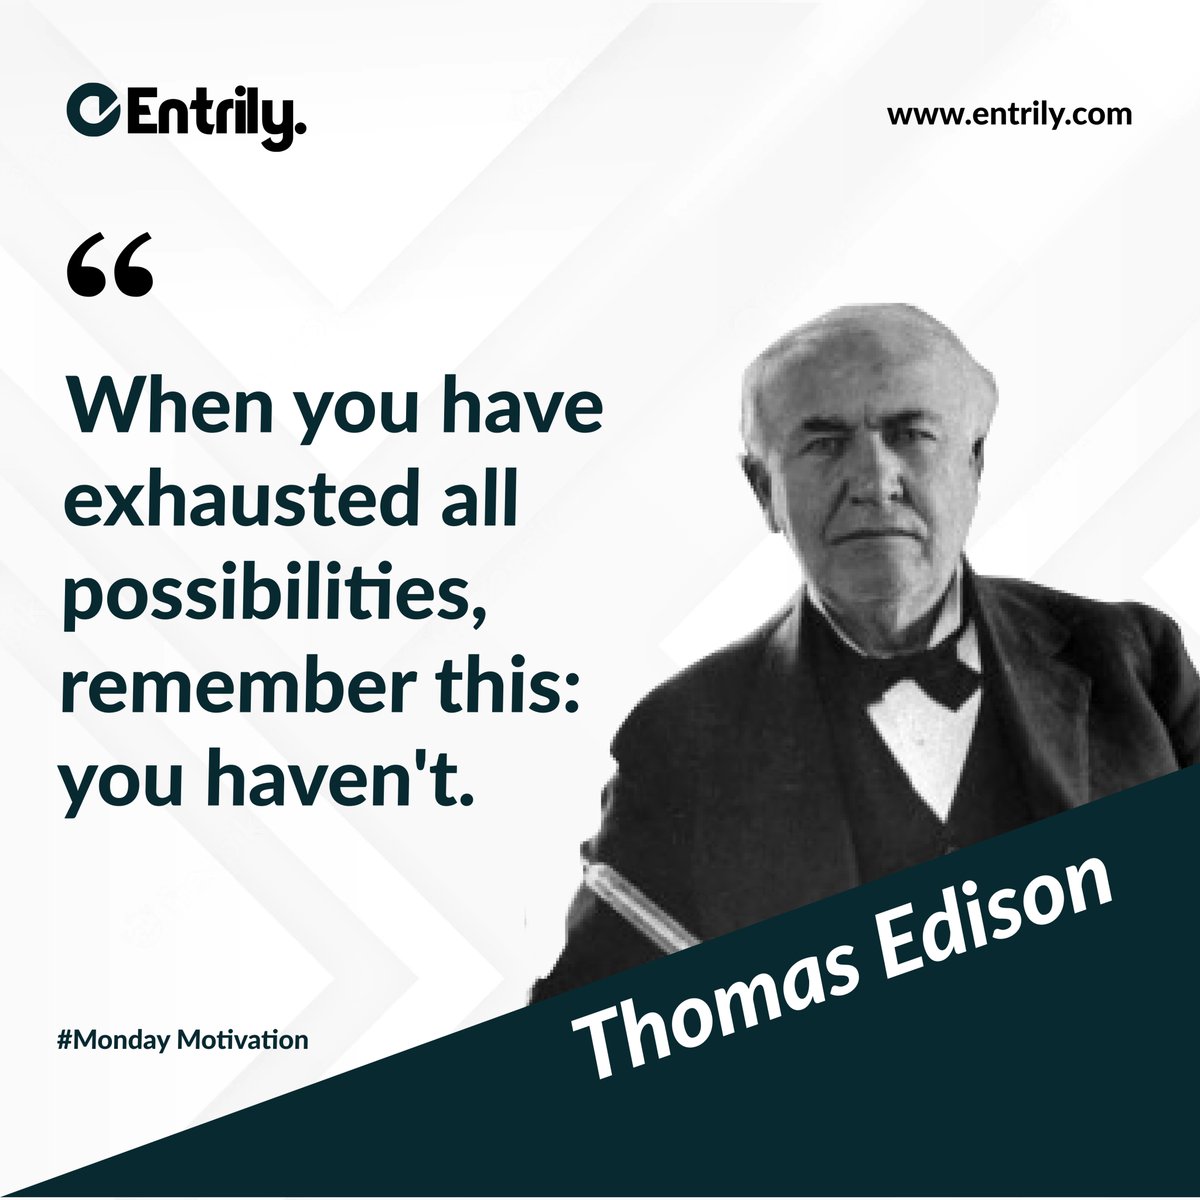 Embrace the resilience within!
'When you have exhausted all possibilities, remember this: you haven't.' - Thomas Edison. 
#resilience #thomasedisonwisdom #possibilitiesareendless #entrily #nevergiveup #infiniteinnovation #triumphoverchallenges